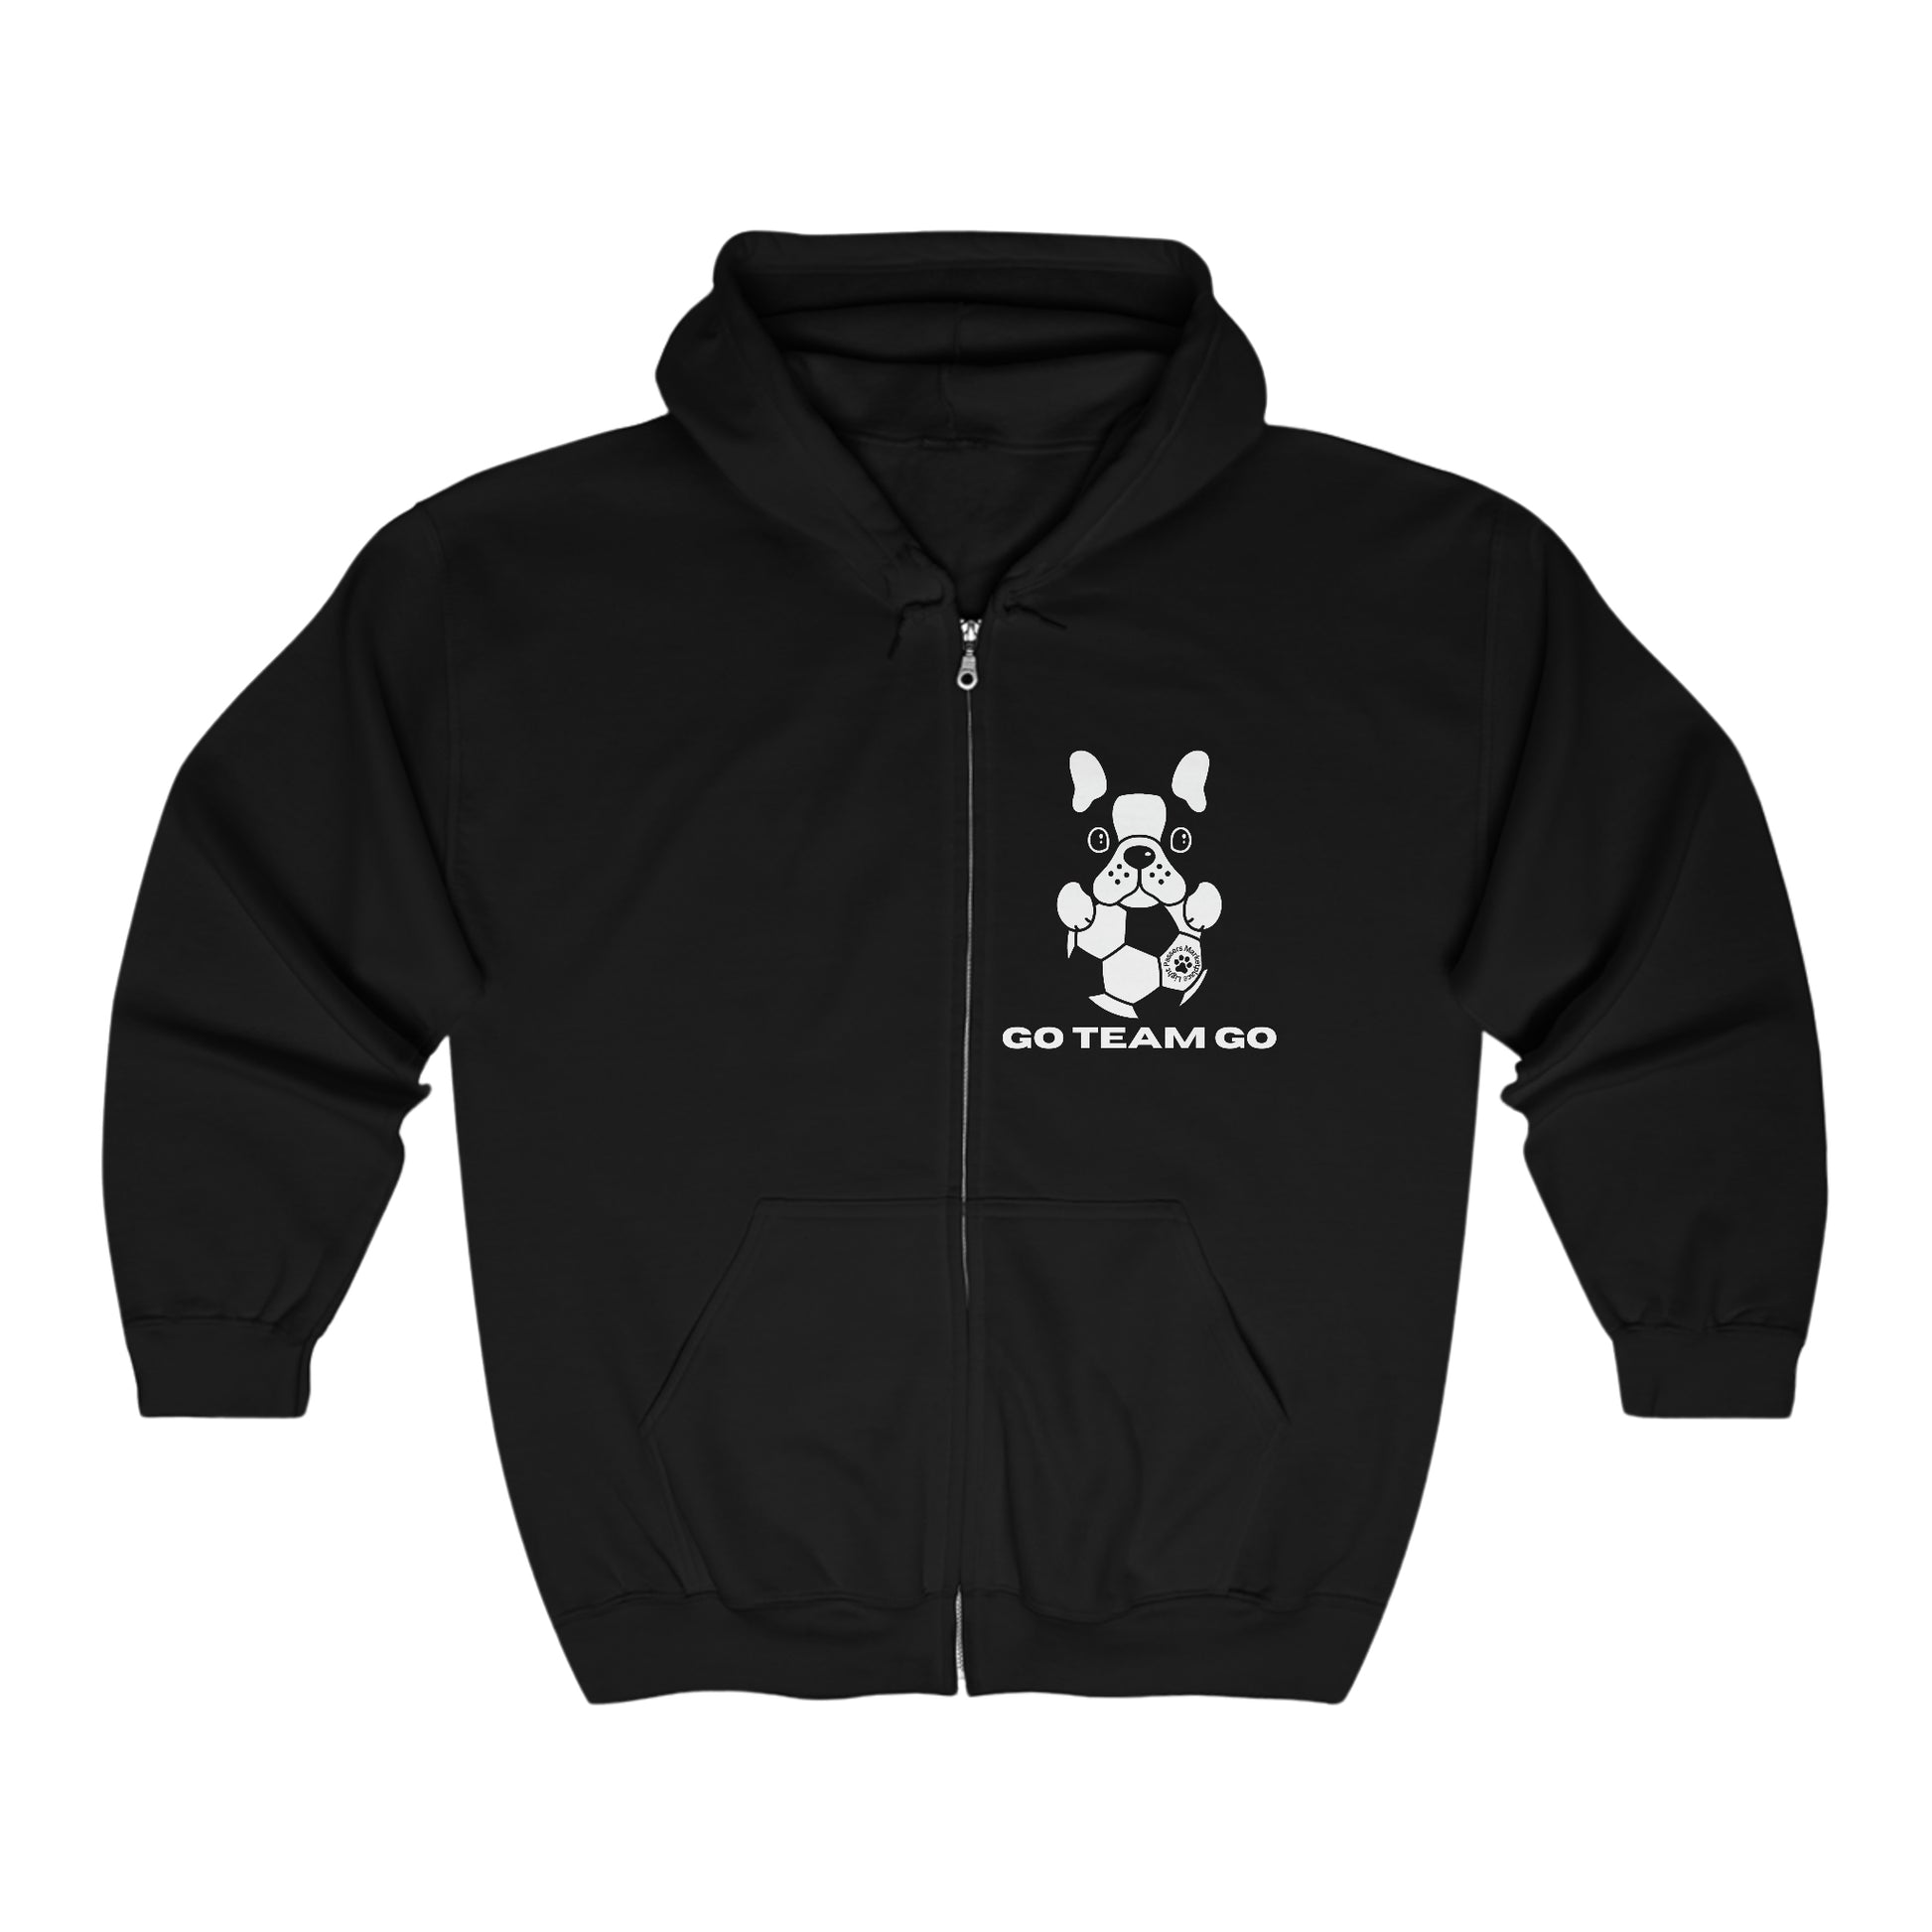 A black full zip hooded sweatshirt featuring a white dog with a football. Comfy blend of 50% cotton, 50% polyester, medium-heavy fabric, classic fit, and sewn-in label.